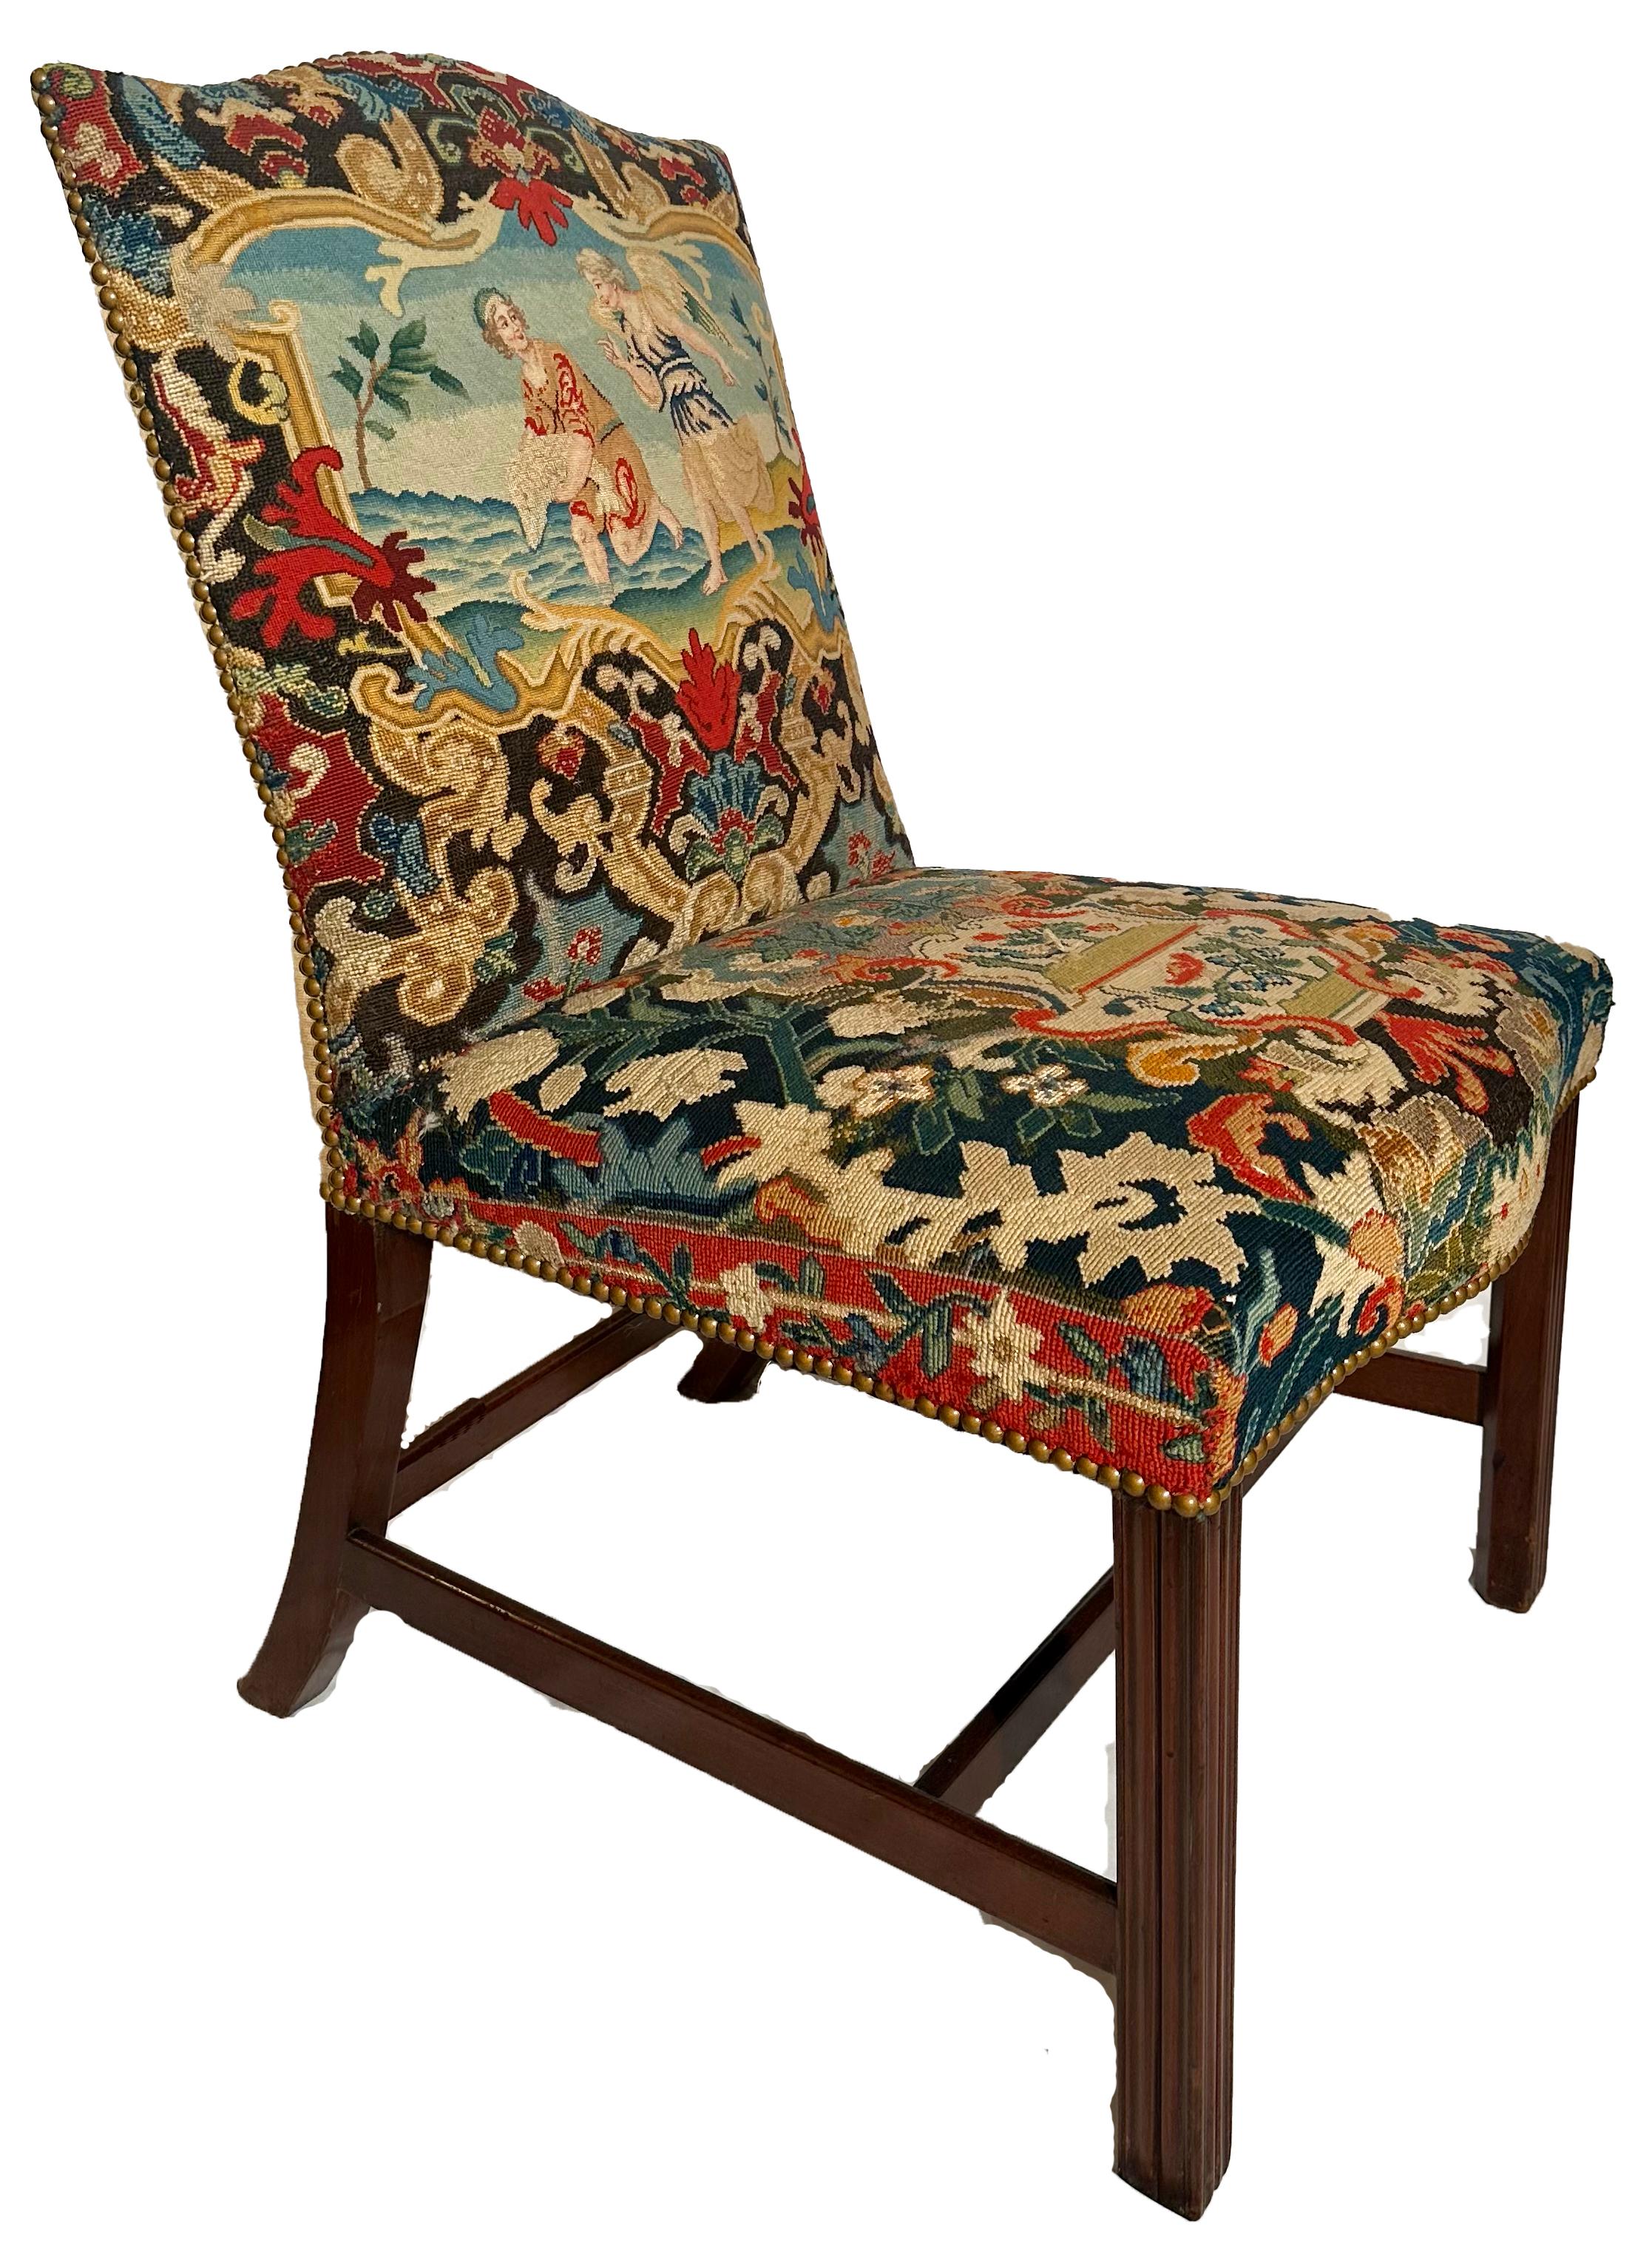 Set of 10 Antique English Georgian Mahogany & Needlepoint Chairs, Circa 1820-1830.
All chairs have original needle point and petit point scenes of Biblical subjects.  